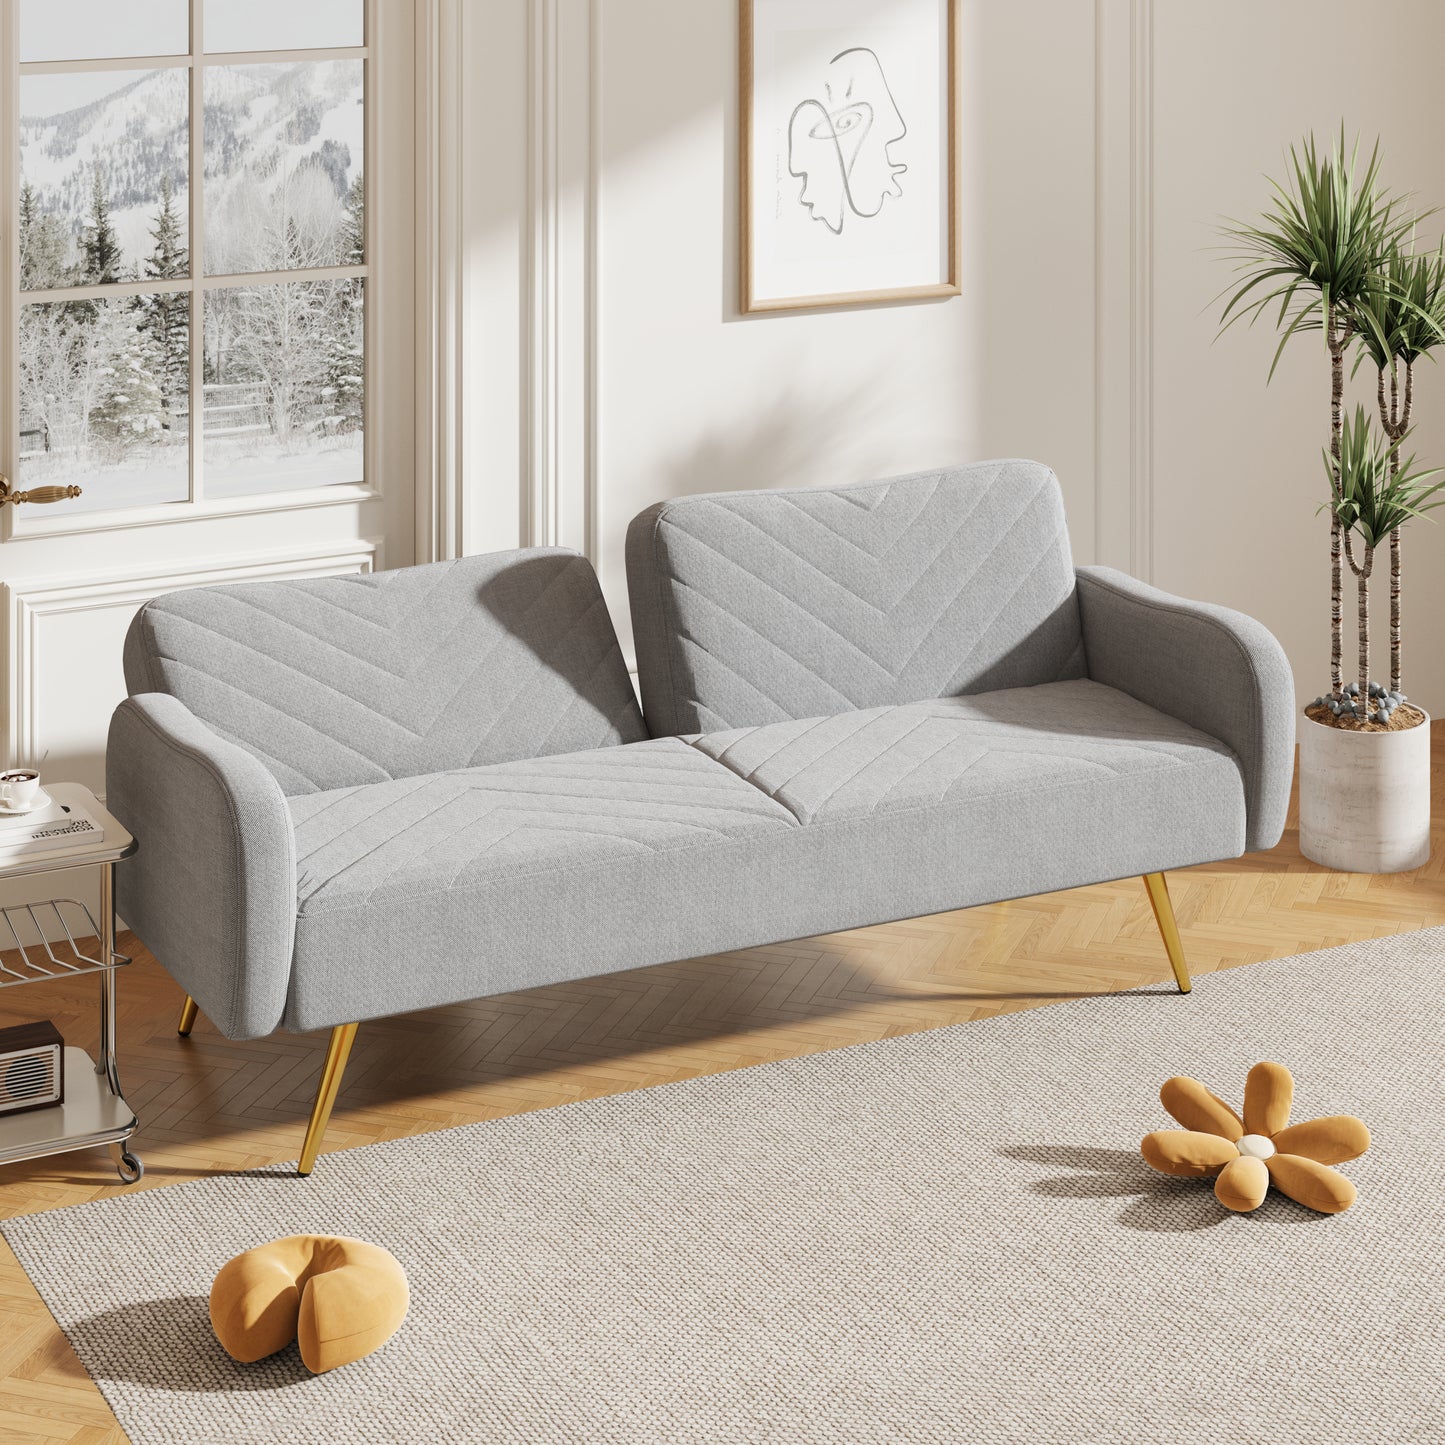 70.47" Gray Fabric Double Sofa with Split Backrest and Two Throw Pillows